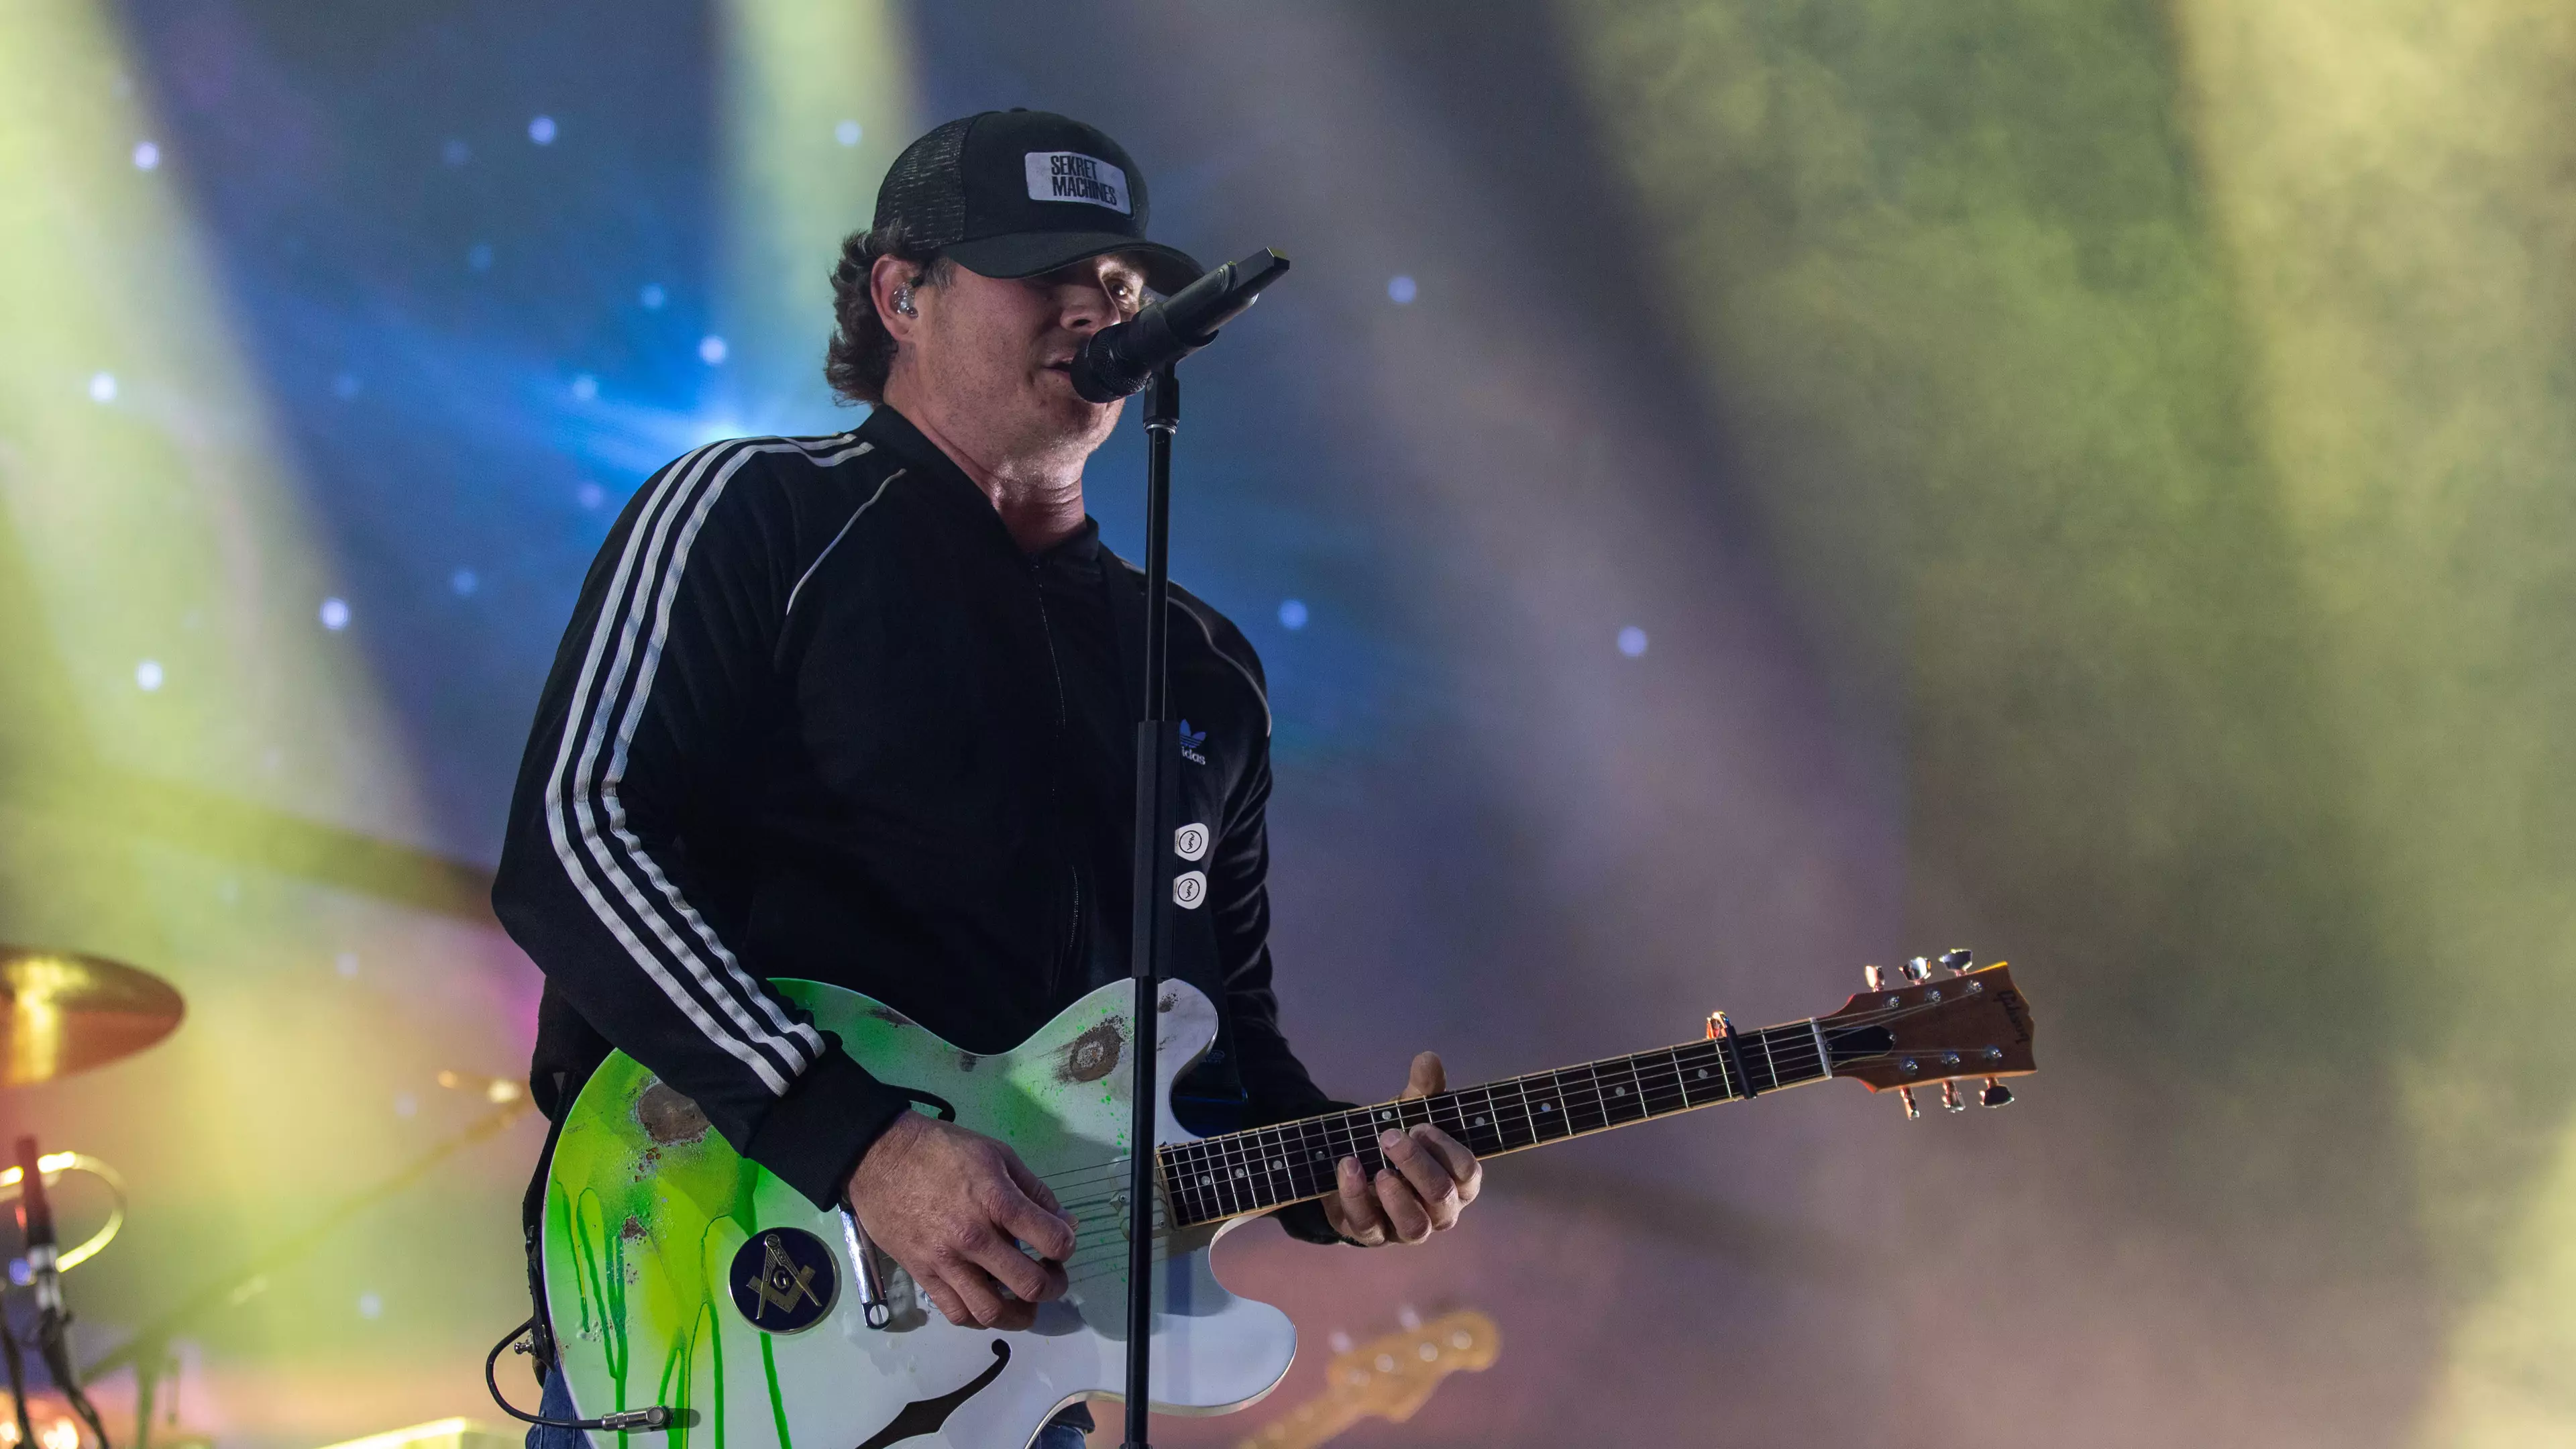 Tom DeLonge Reckons He'll Play With Blink-182 Again Some Day